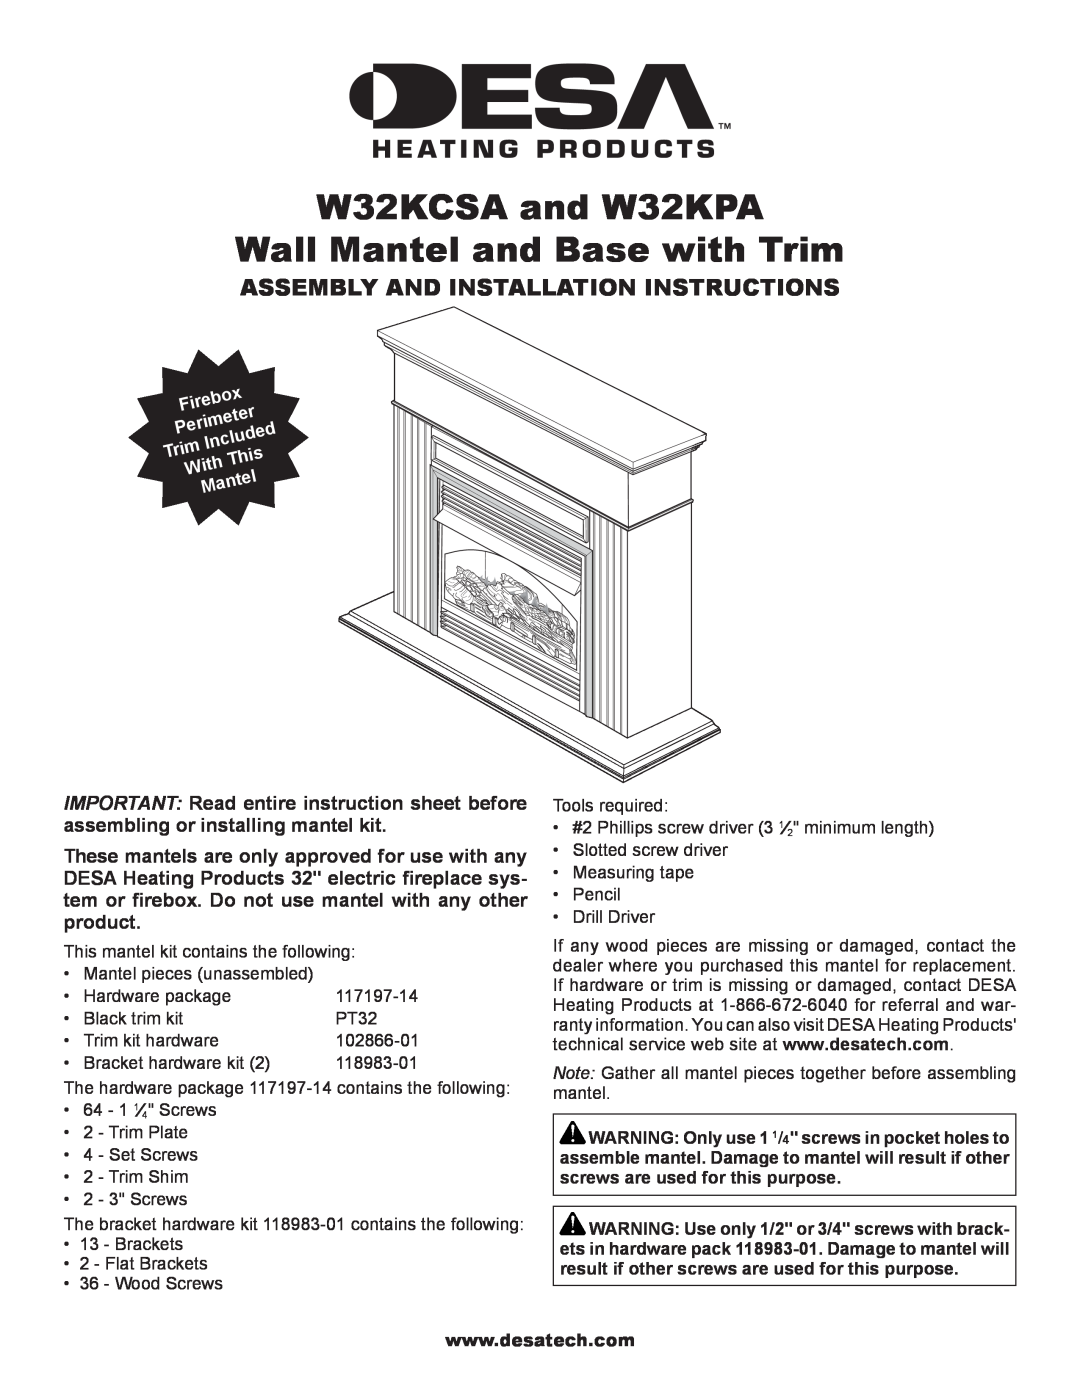 Desa installation instructions W32KCSA and W32KPA Wall Mantel and Base with Trim 